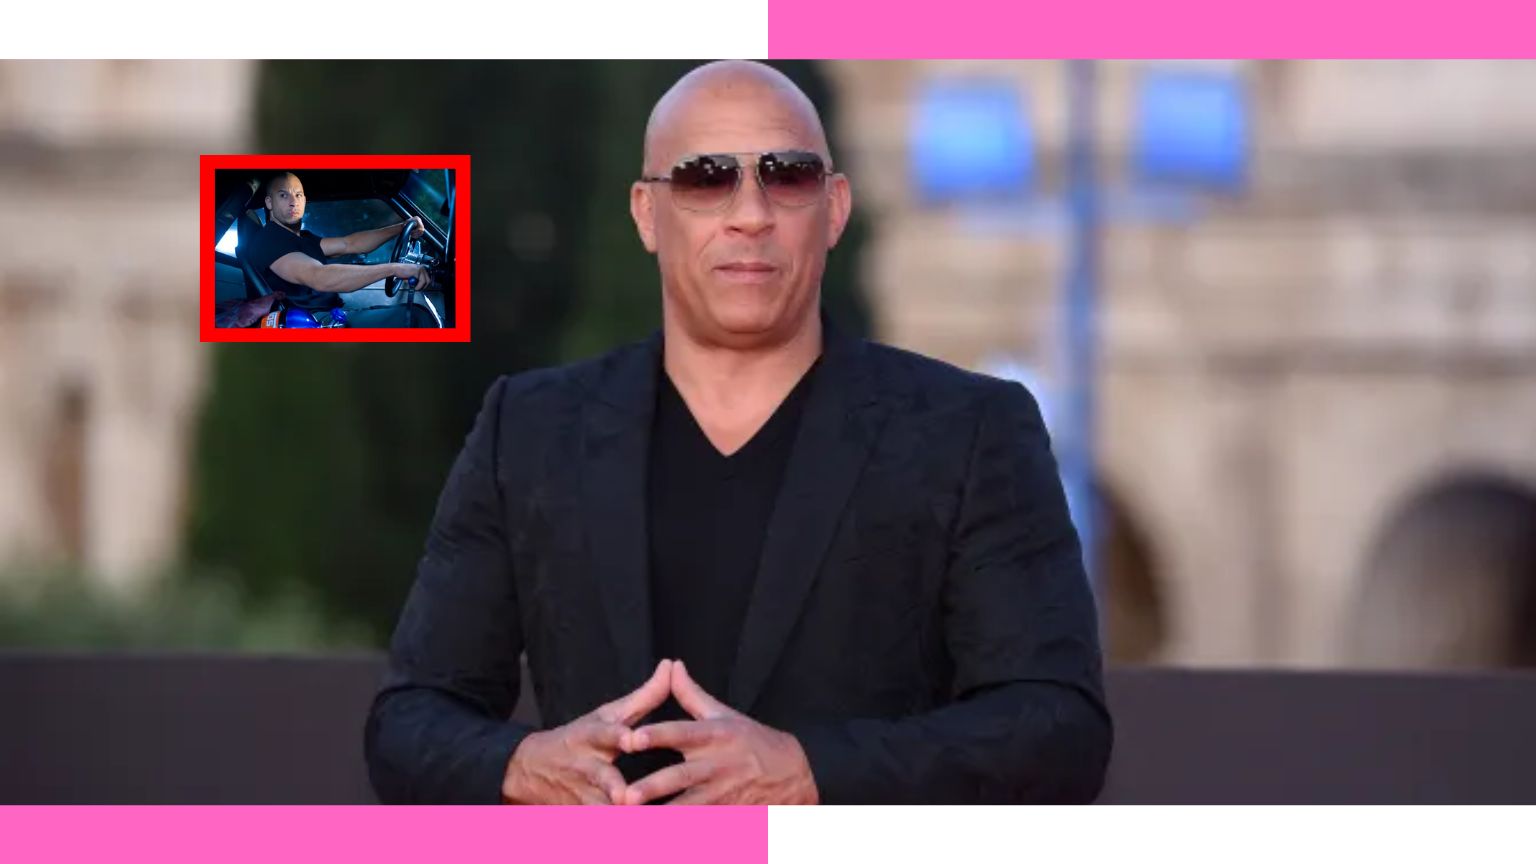 Fast & Furious star 'Vin Diesel' Faces Allegations of 'Sexual Battery' by Ex Assistant Asta Jonasson